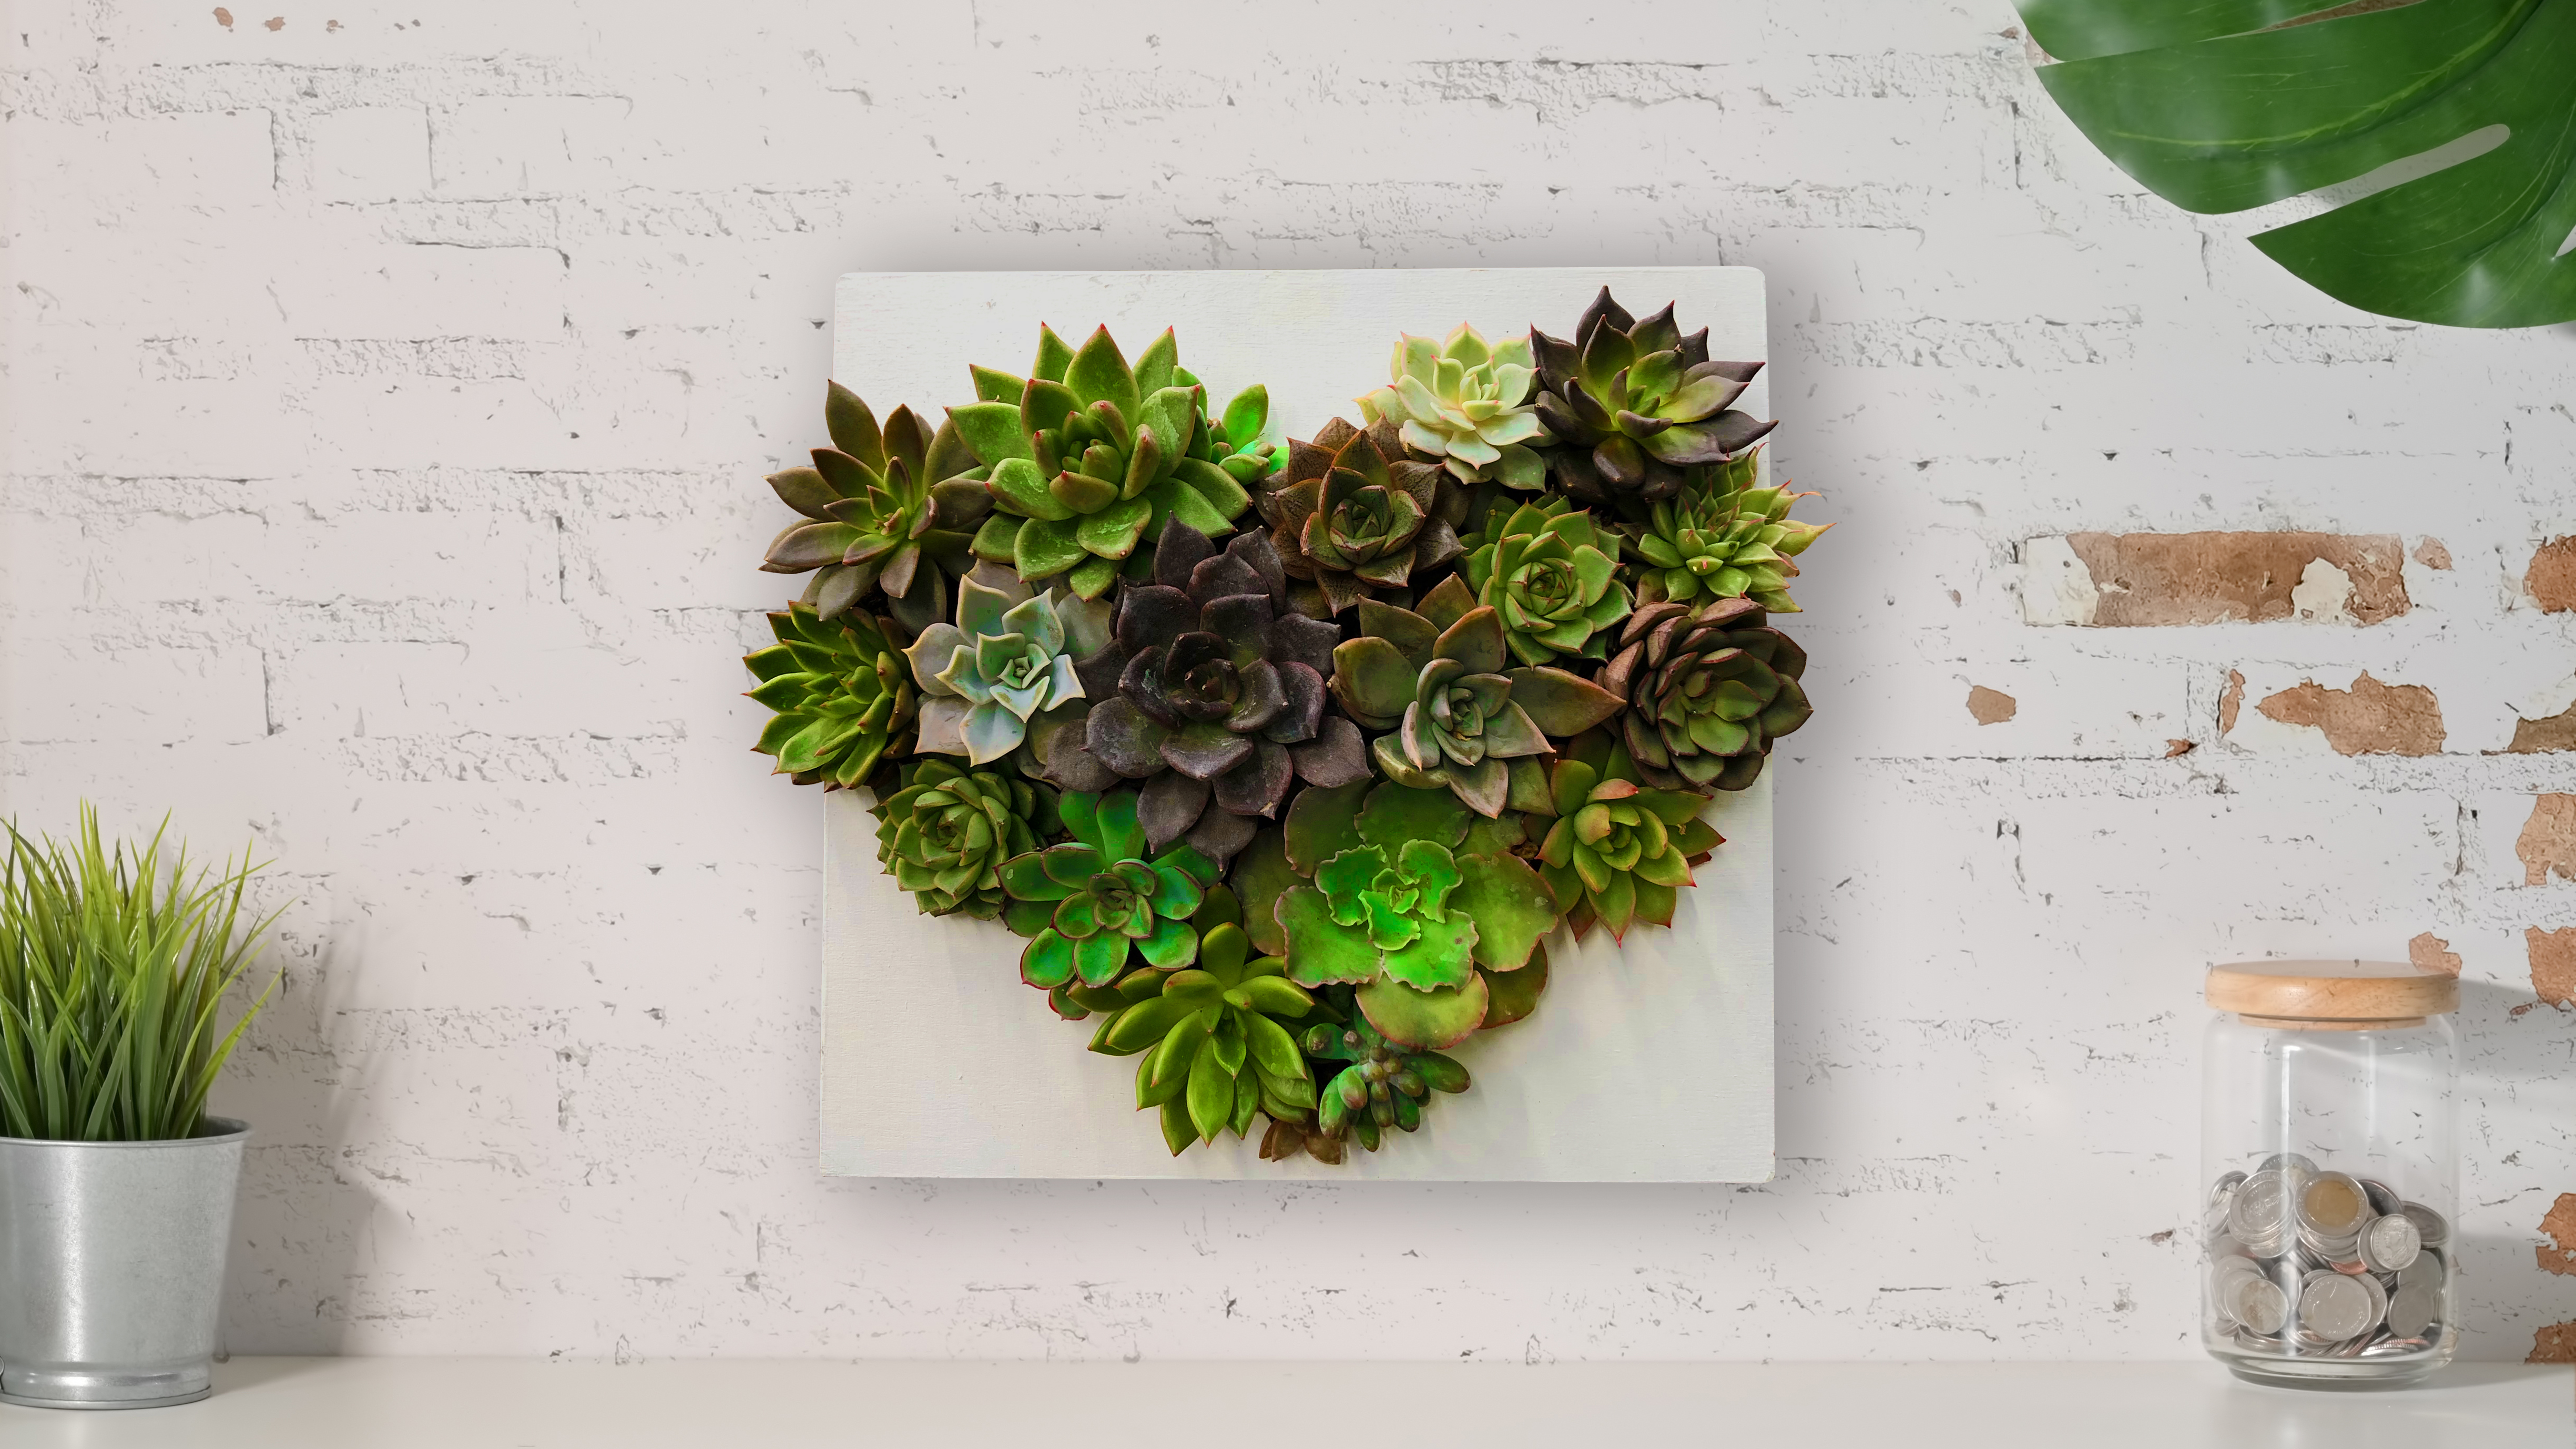 Heart of Succulents displayed on wall or desktop.